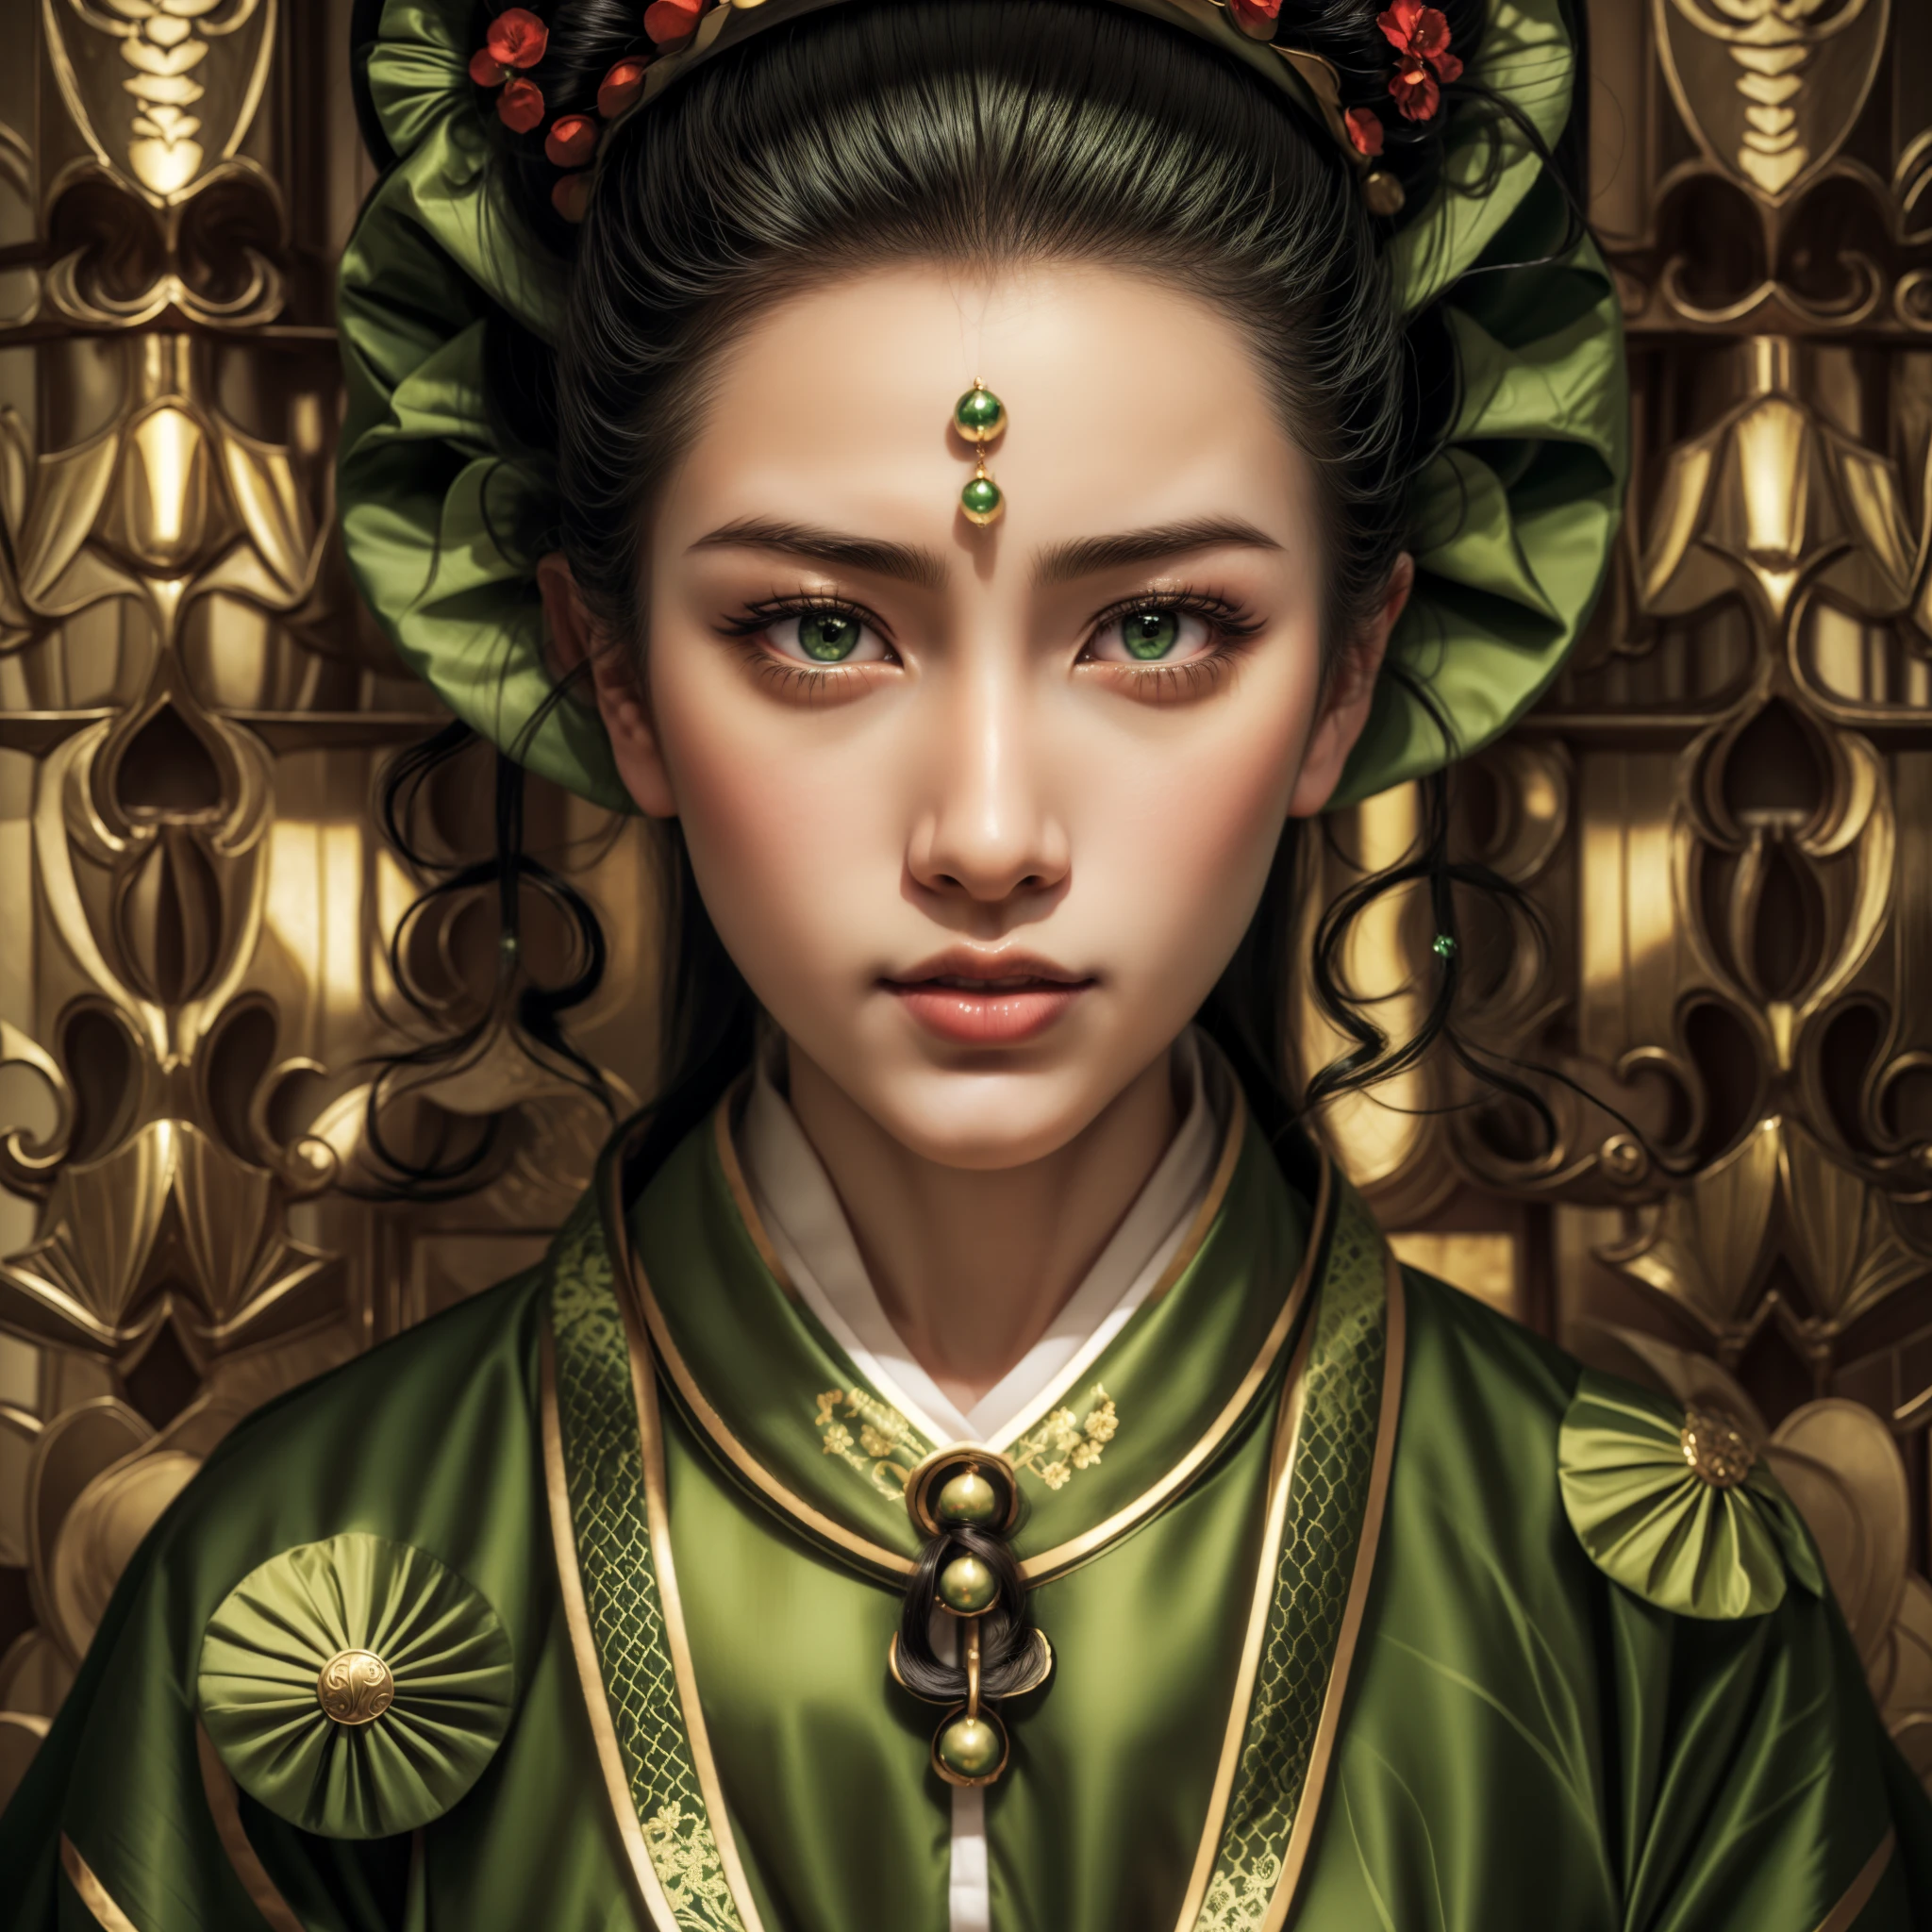 masterpiece, a beautiful young japanese gothic geisha, beautiful long black hair, beautiful (green) eyes, beautiful lips, pale silky skin (well made up), wearing buns in her hair, wearing a stylized green hat, wearing a beautiful green kimono with two red flowers both sides, and in the background golden gates, beautiful hyperrealistic gothic geisha of all ages, photorealistic new age geisha, priestess geisha of the beauty of intricate details.